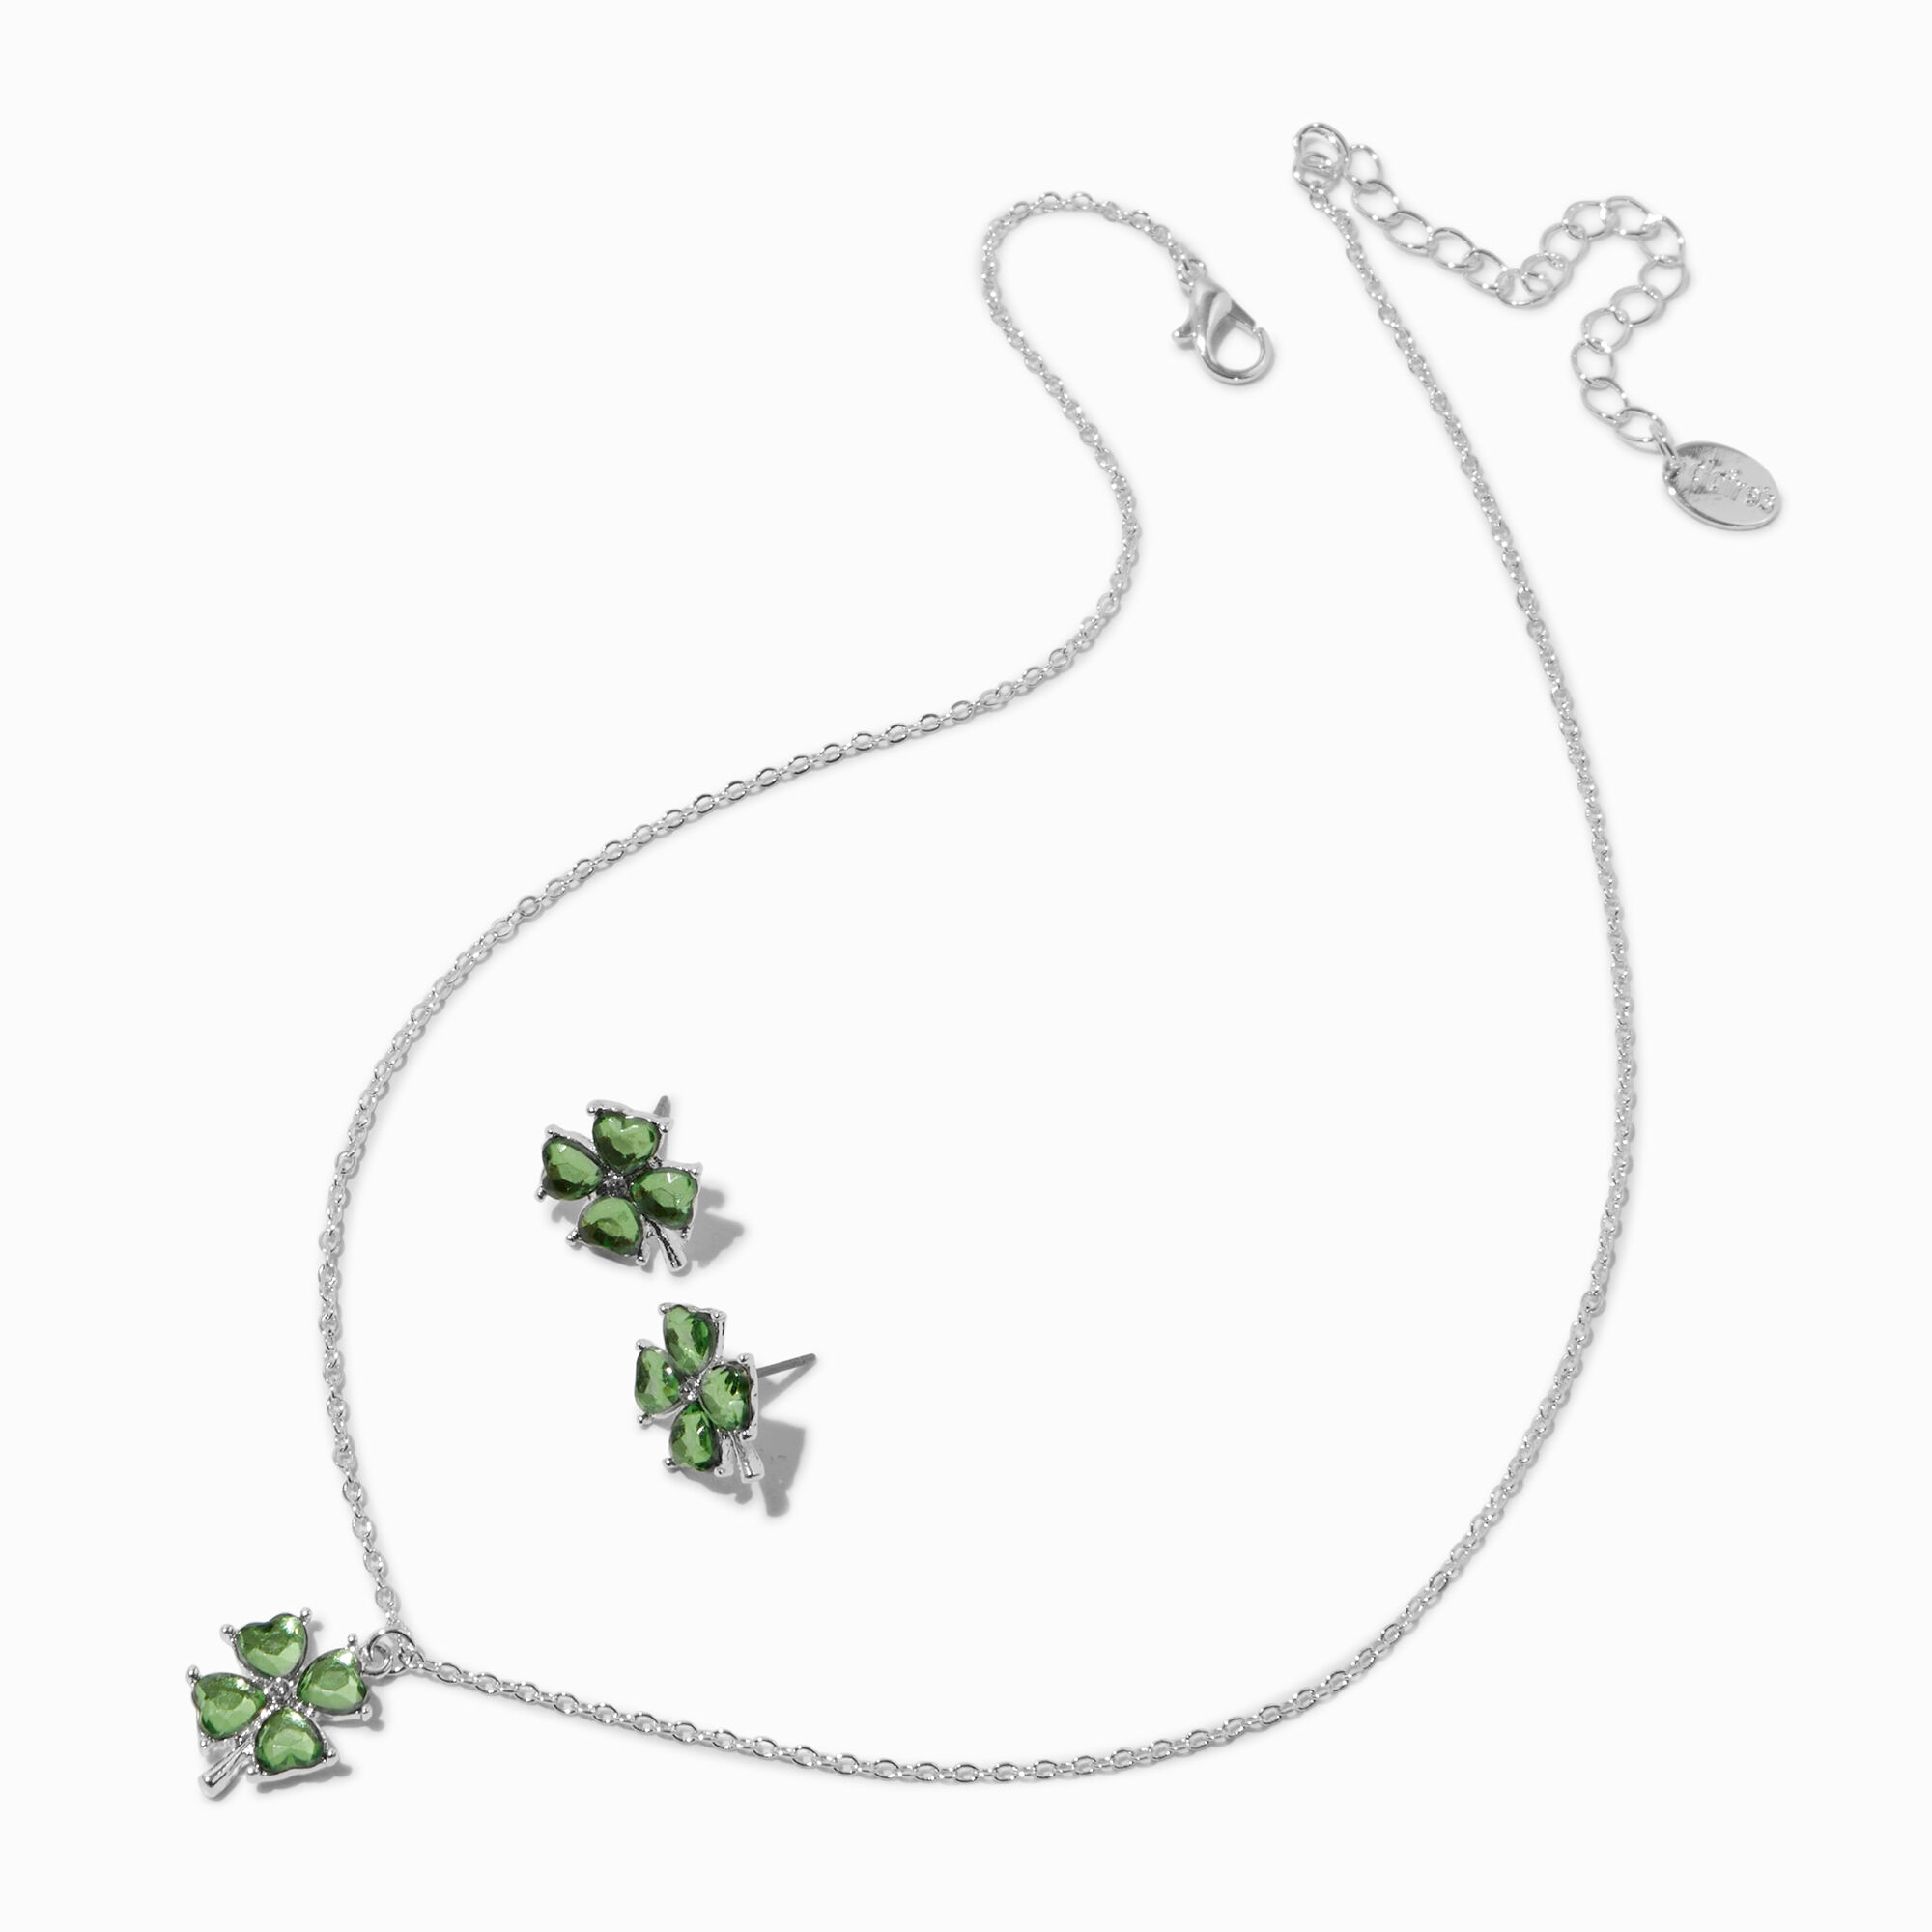 View Claires Gemstone Shamrock Necklace Stud Earring Set 2 Pack Silver information